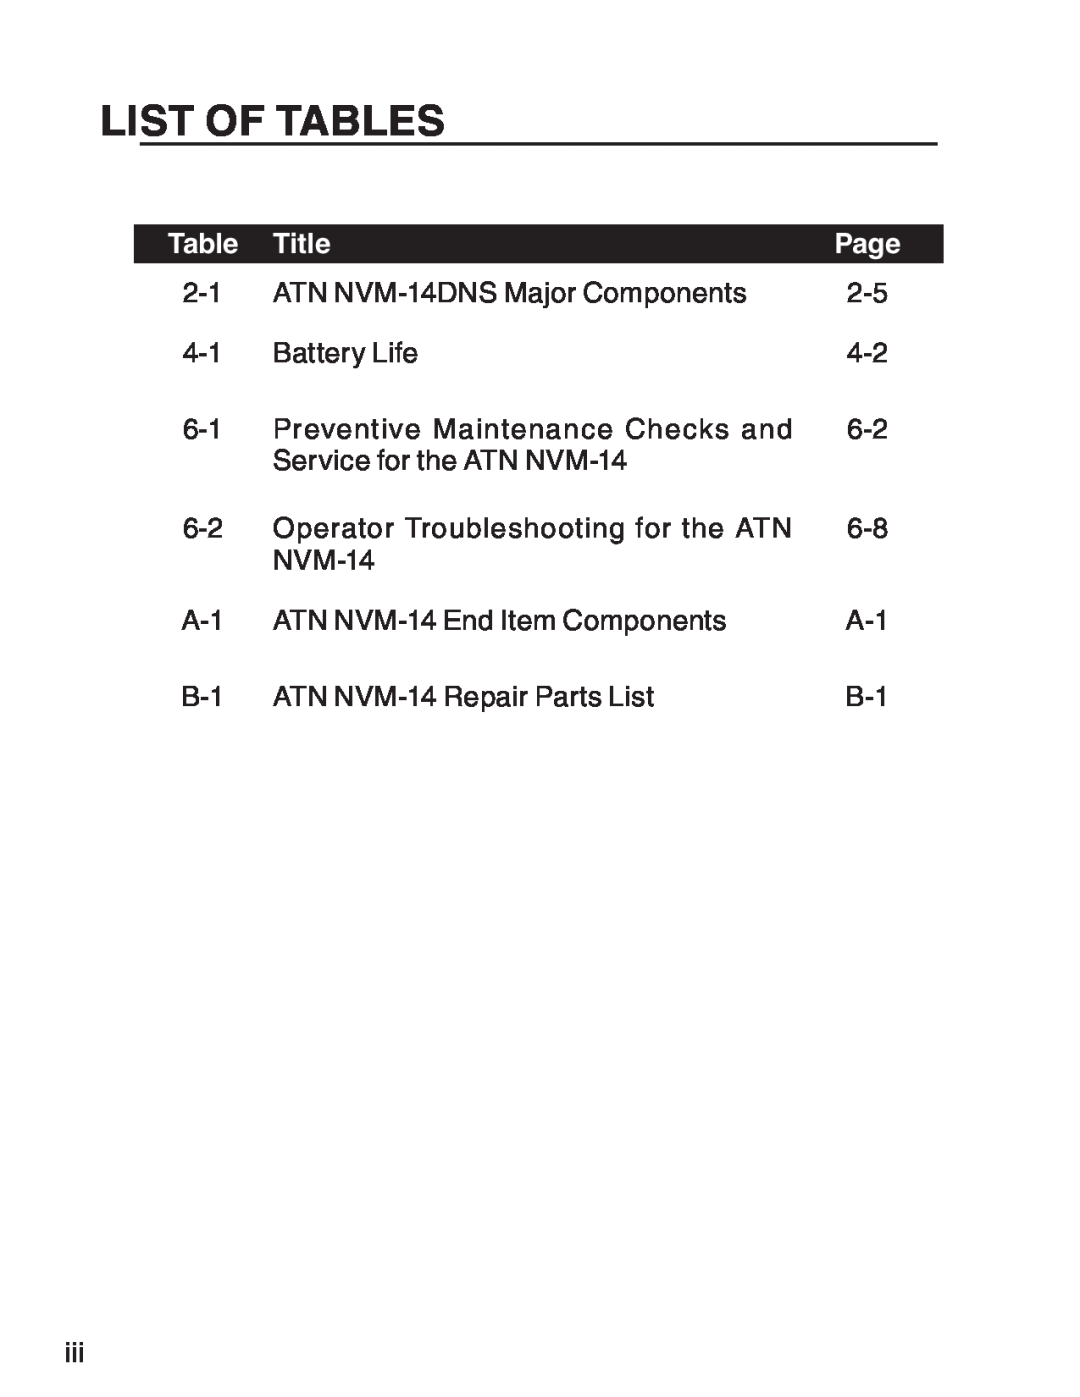 ATN 3 manual List Of Tables, Title 